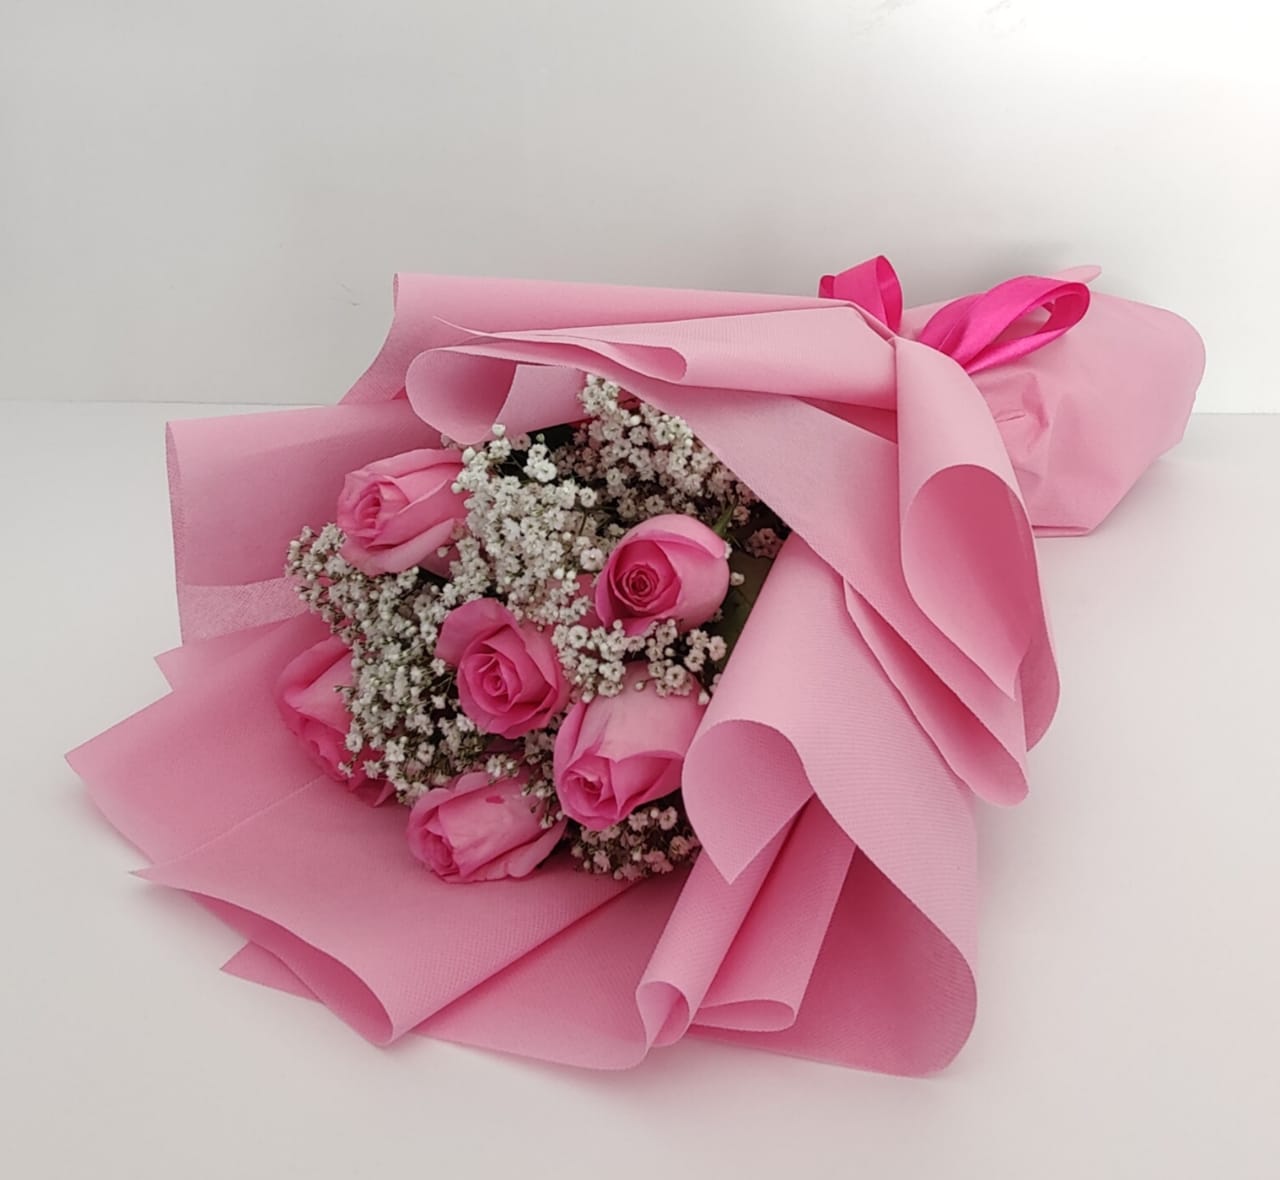 6 pink roses bouquet